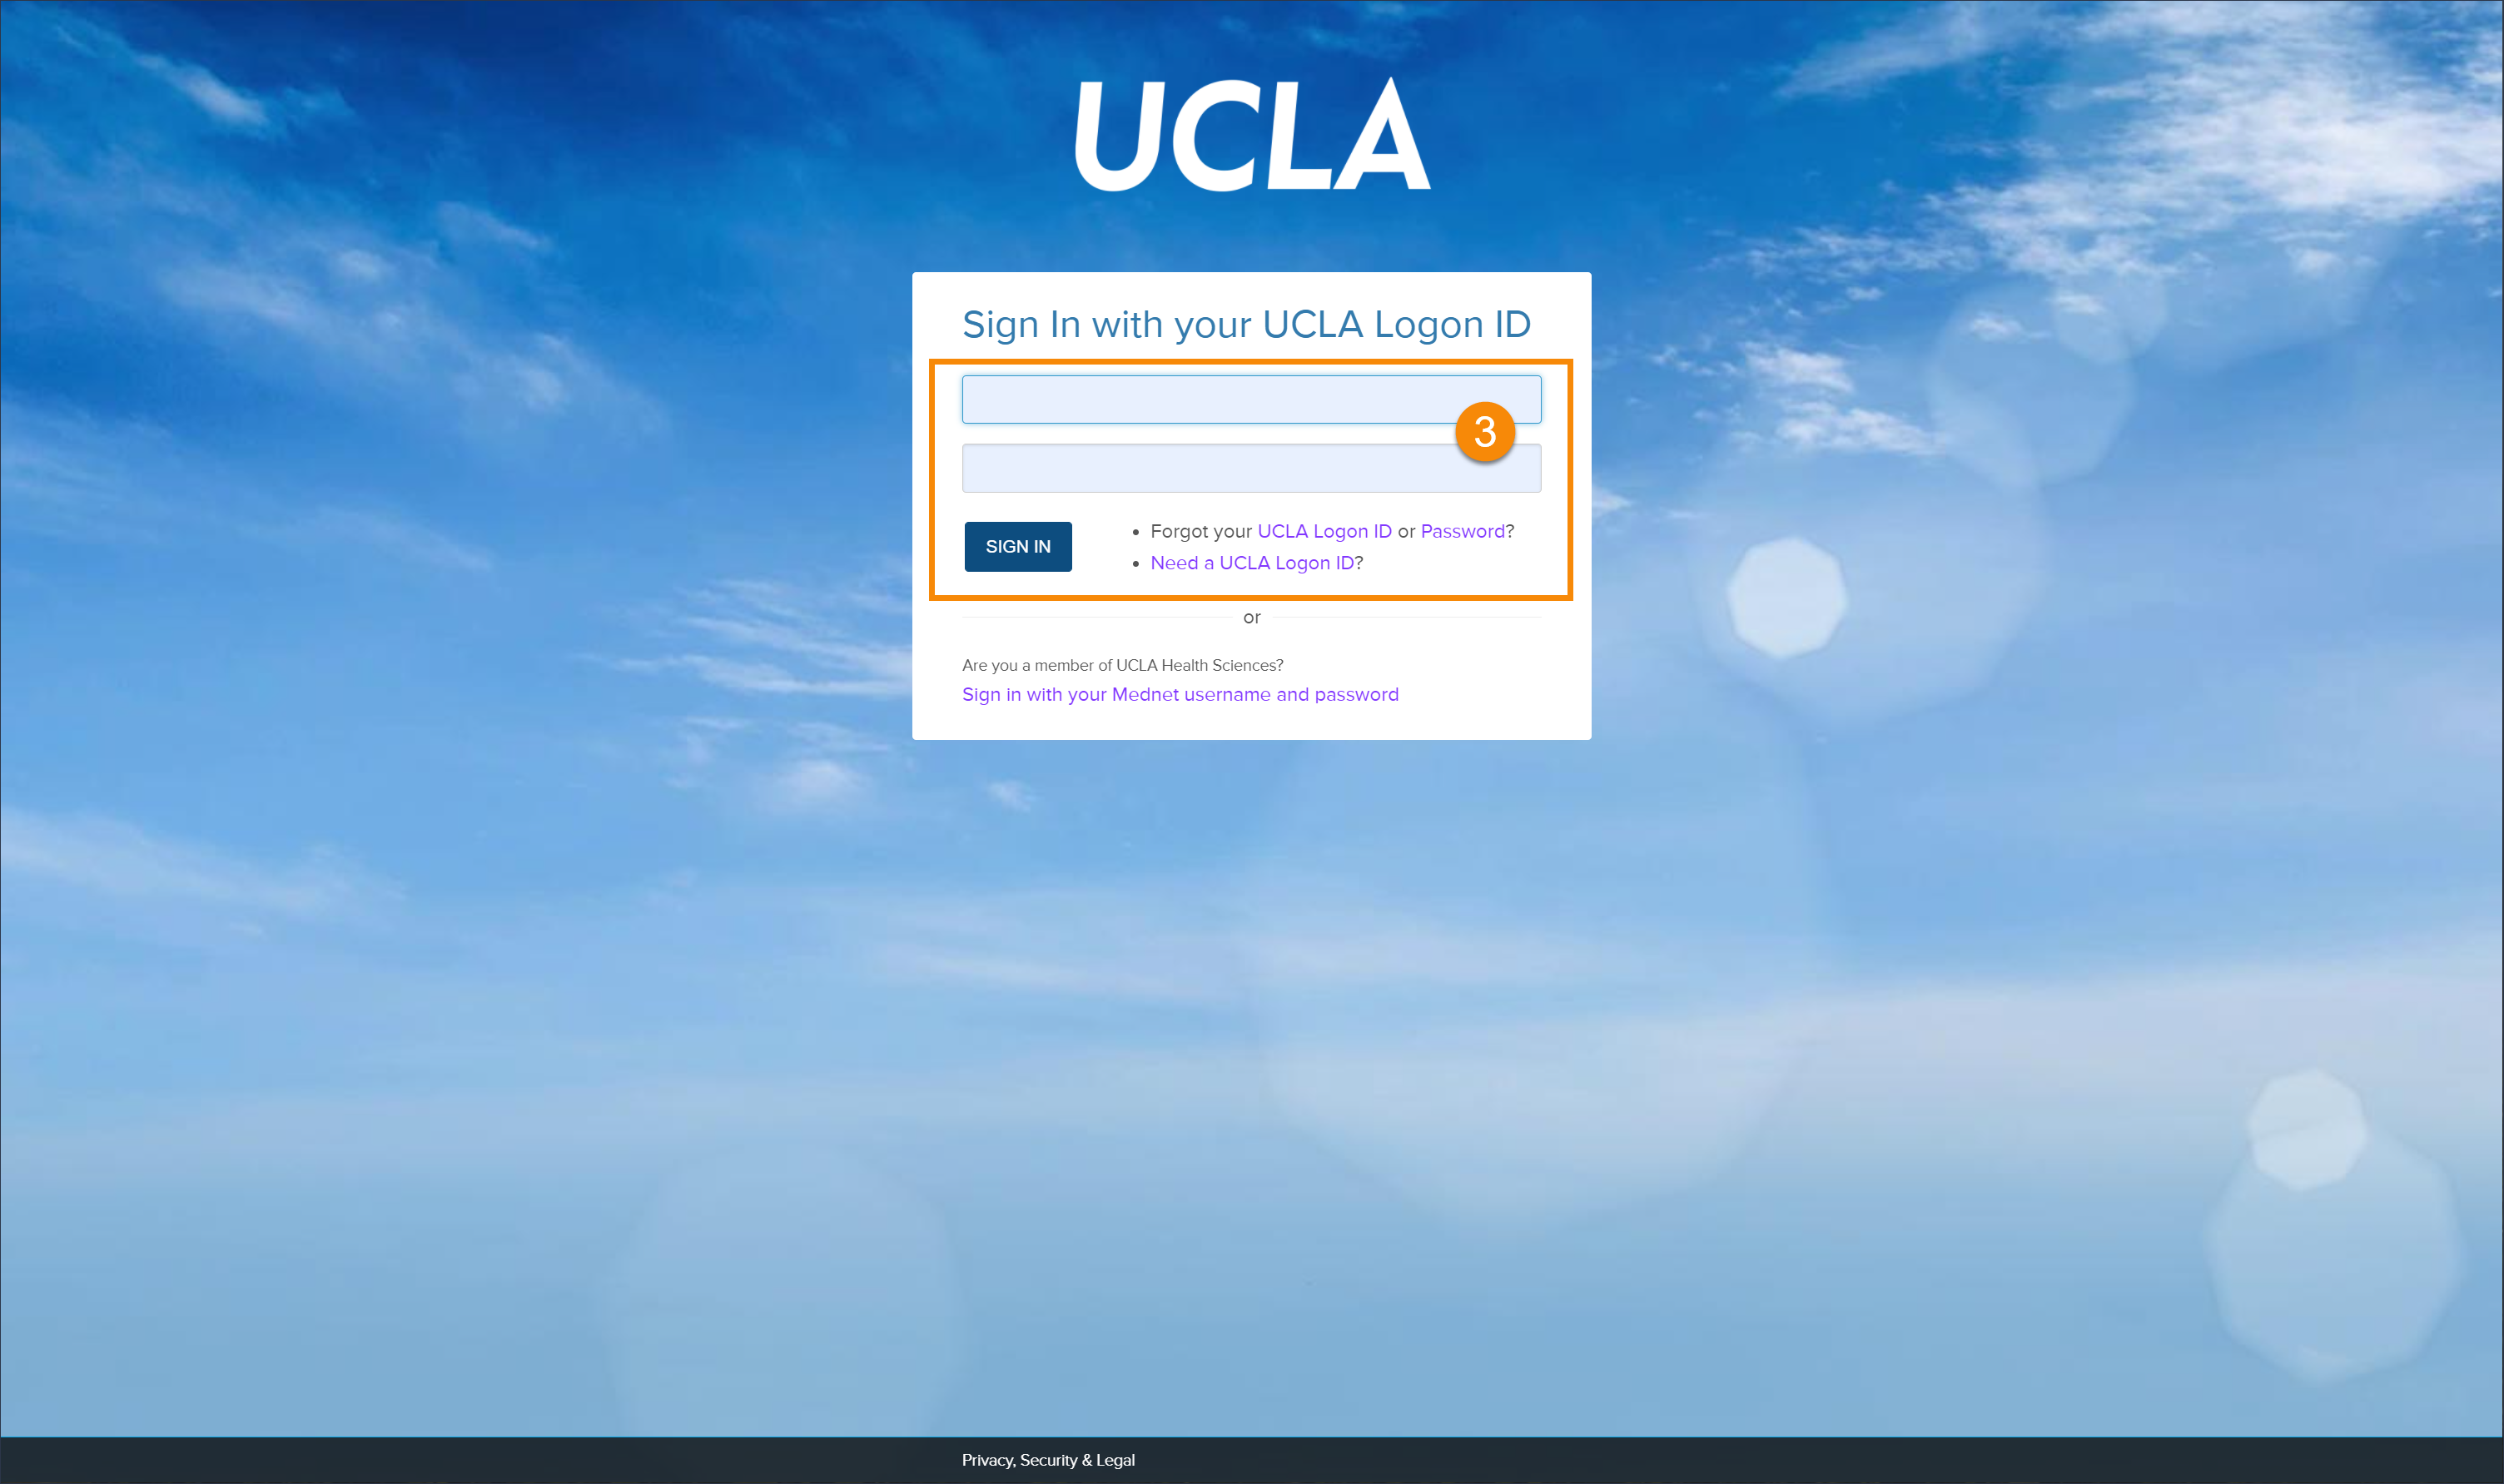 log in page to input campus credentials